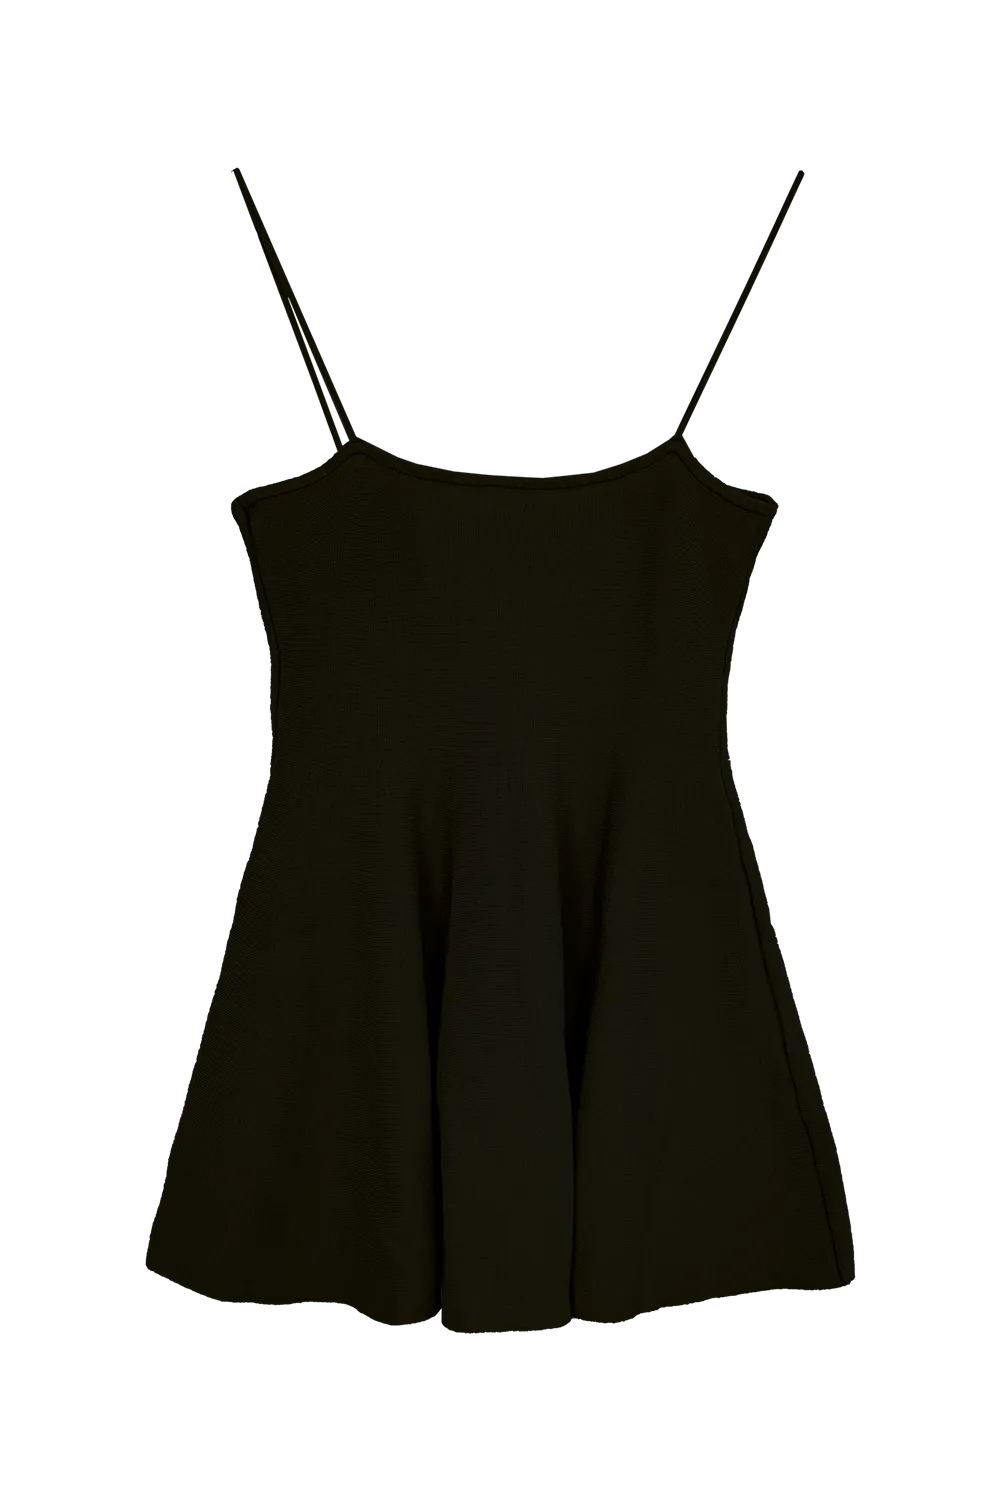 Women's Flowing Camisole Top with Delicate Straps and Flared Hem